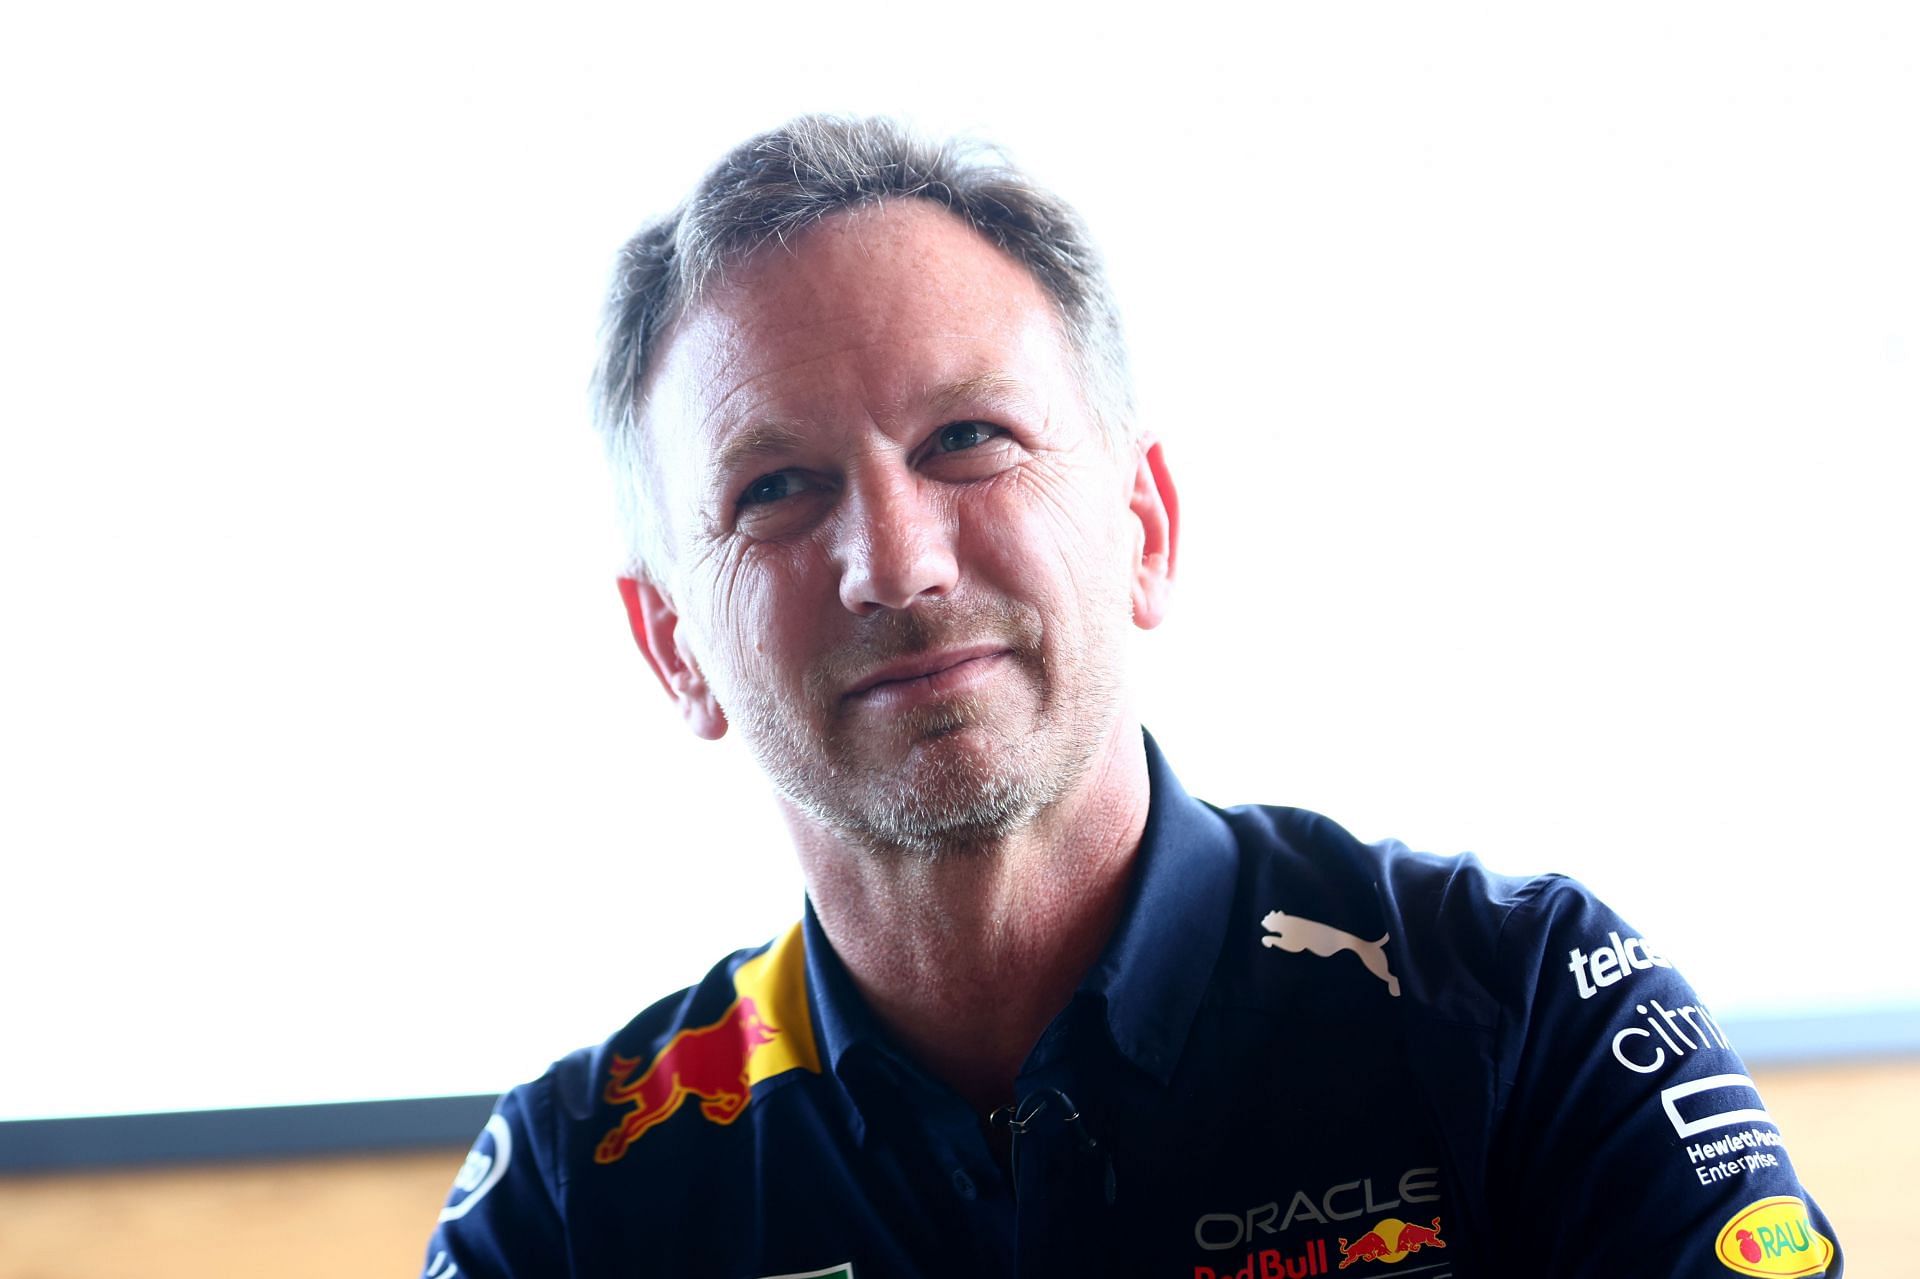 Red Bull Racing Team Principal Christian Horner looks on prior to practice ahead of the F1 Grand Prix of Hungary at Hungaroring on July 29, 2022 in Budapest, Hungary. (Photo by Mark Thompson/Getty Images)